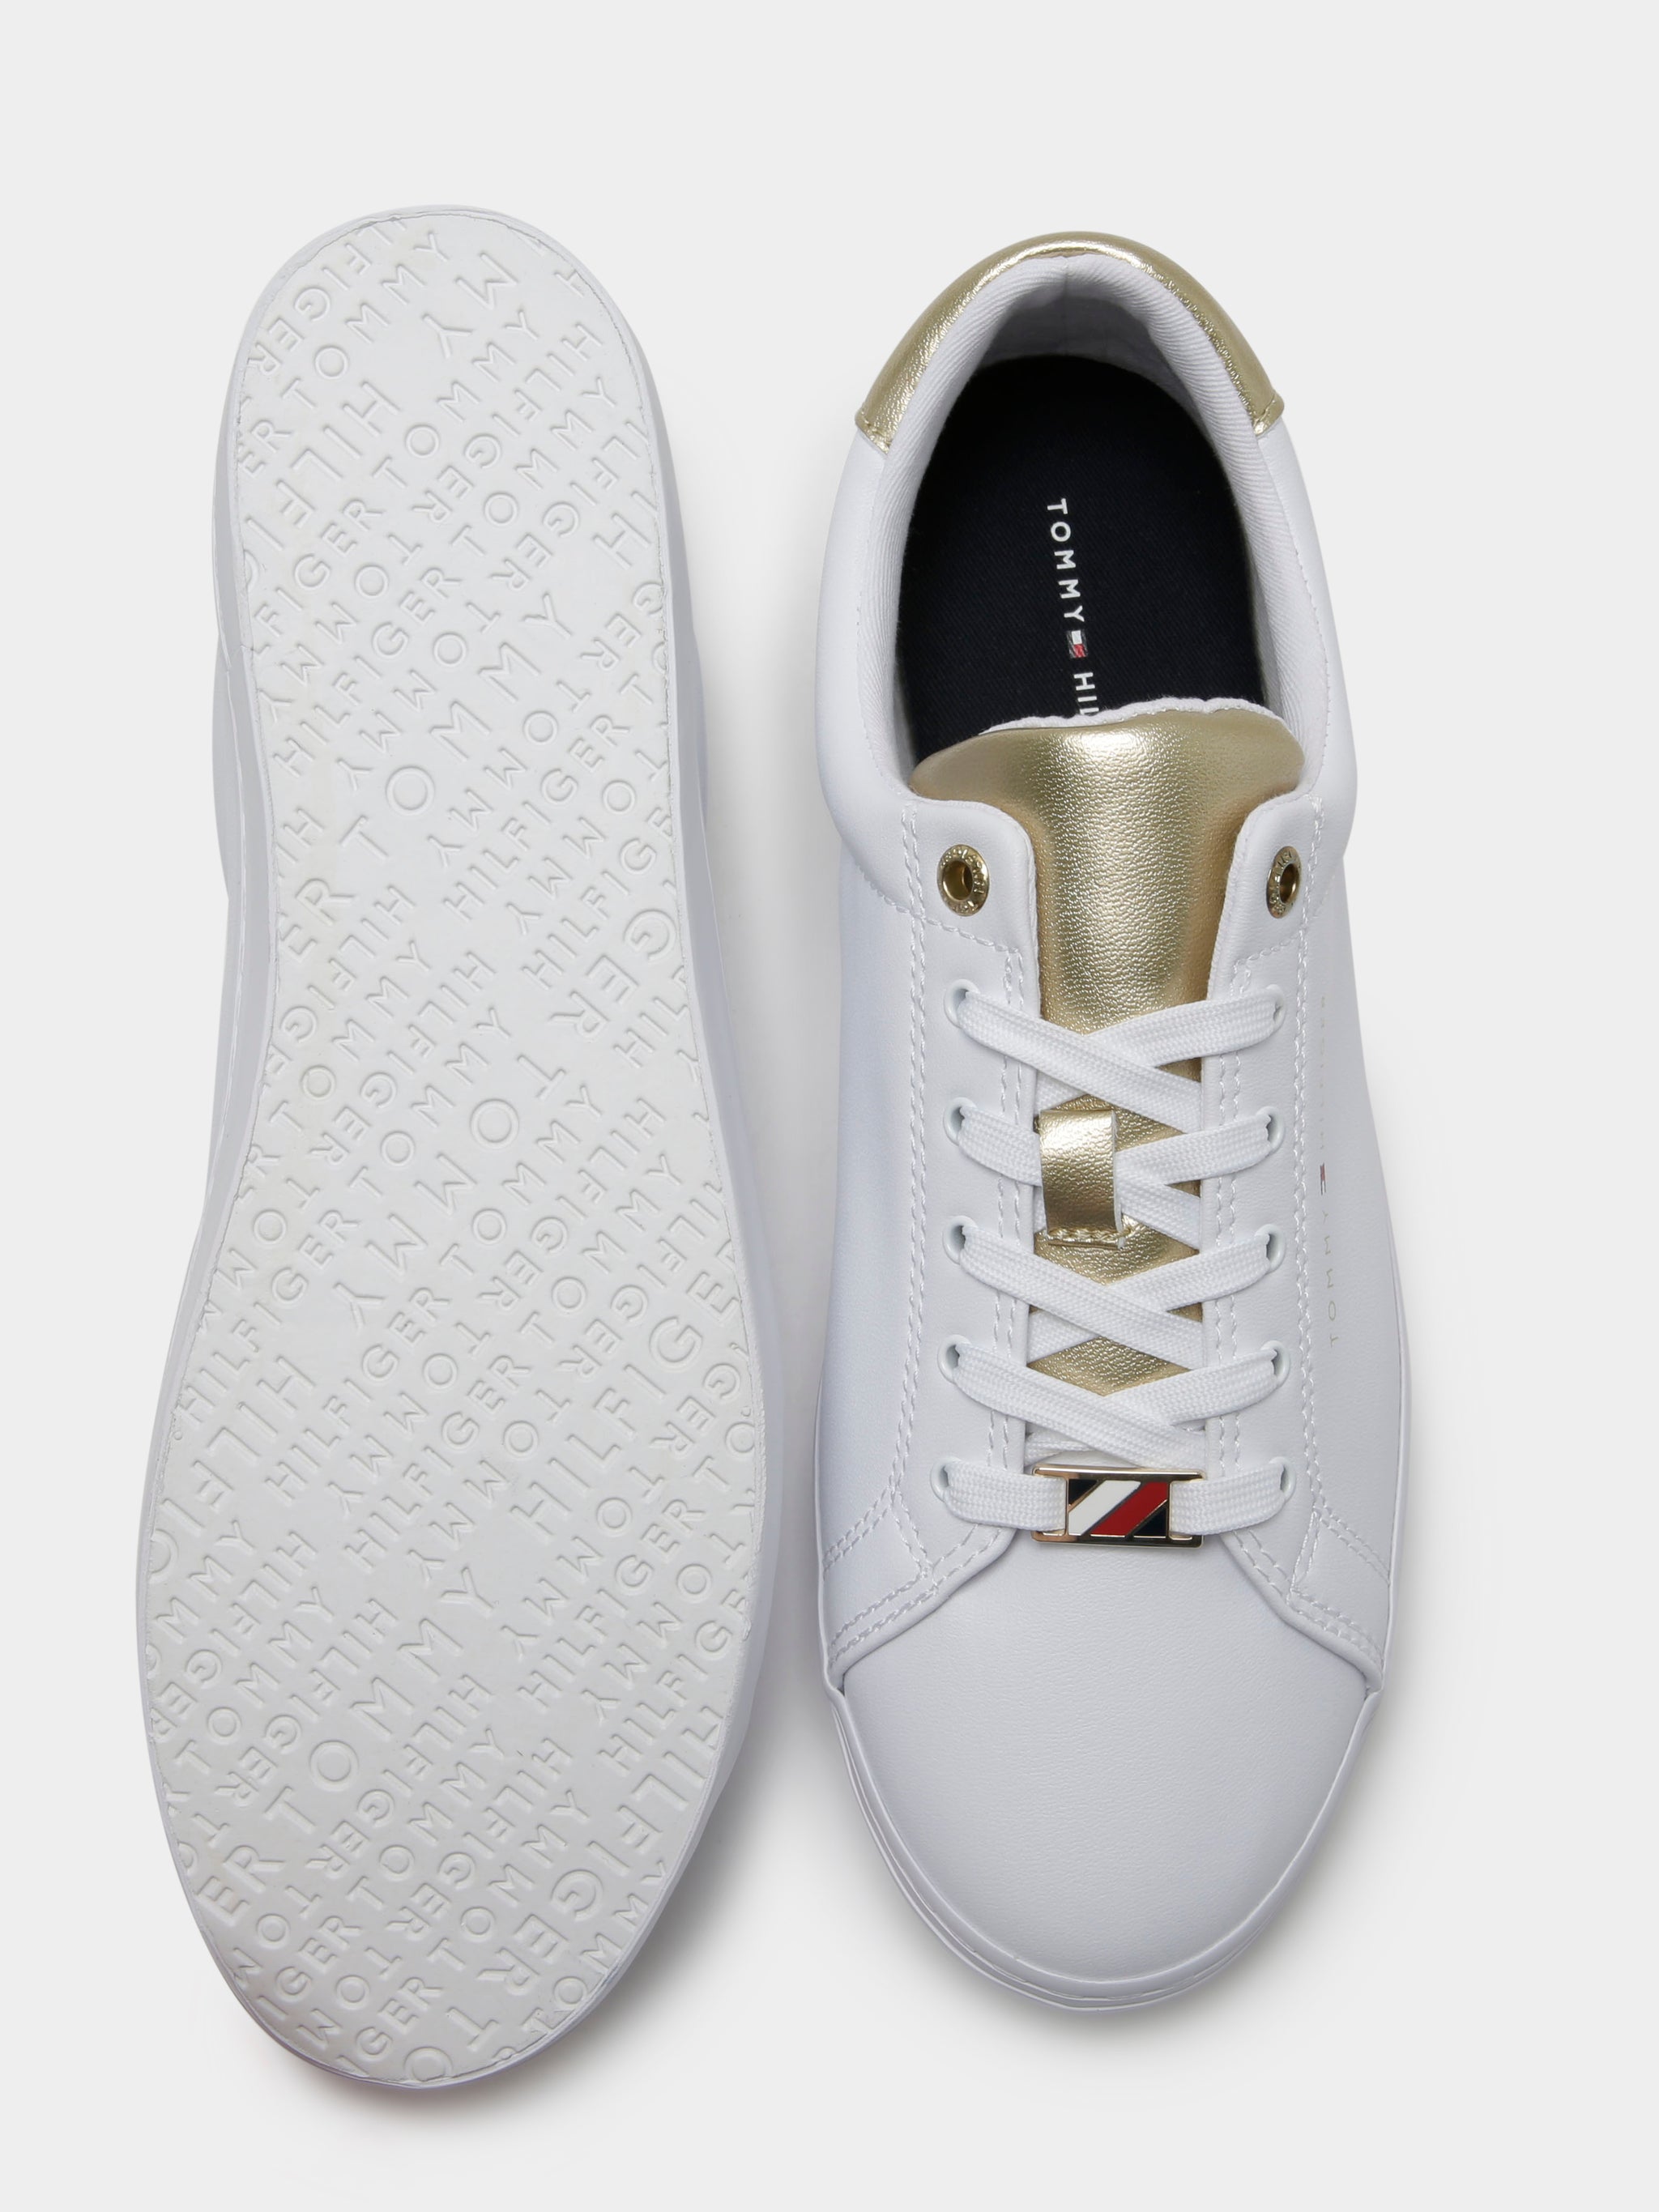 Tommy Hilfiger Womens White & Gold Leather Sneakers